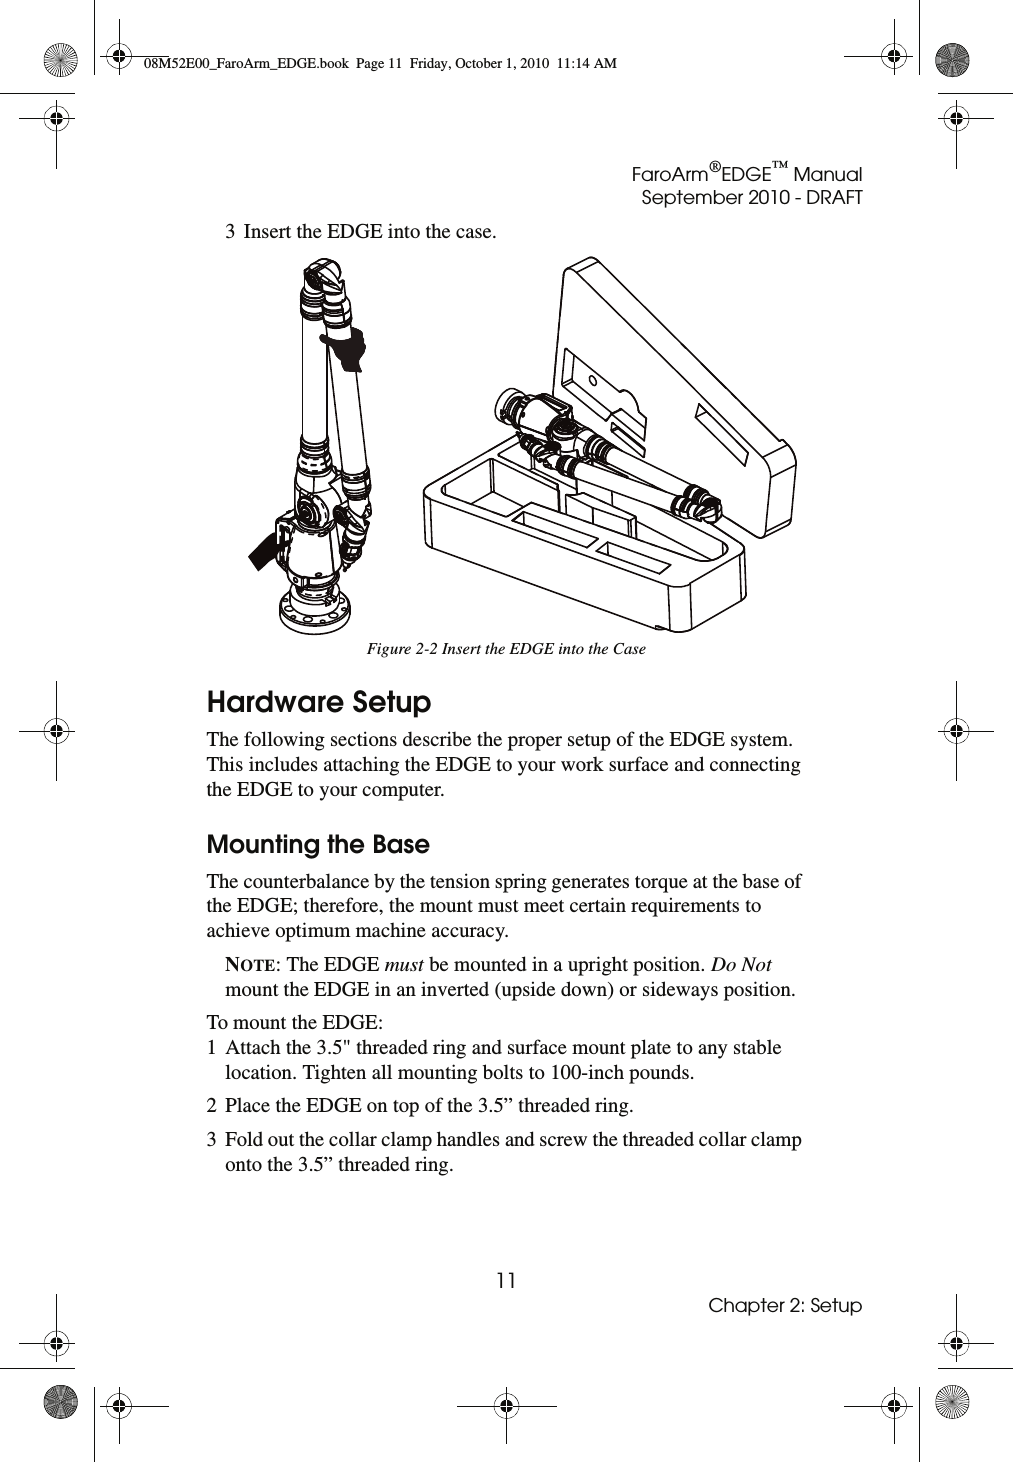 FaroArm®EDGE™ ManualSeptember 2010 - DRAFT11Chapter 2: Setup3 Insert the EDGE into the case. Hardware SetupThe following sections describe the proper setup of the EDGE system. This includes attaching the EDGE to your work surface and connecting the EDGE to your computer.Mounting the BaseThe counterbalance by the tension spring generates torque at the base of the EDGE; therefore, the mount must meet certain requirements to achieve optimum machine accuracy.NOTE: The EDGE must be mounted in a upright position. Do Not mount the EDGE in an inverted (upside down) or sideways position.To mount the EDGE:1 Attach the 3.5&quot; threaded ring and surface mount plate to any stable location. Tighten all mounting bolts to 100-inch pounds.2 Place the EDGE on top of the 3.5” threaded ring.3 Fold out the collar clamp handles and screw the threaded collar clamp onto the 3.5” threaded ring.Figure 2-2 Insert the EDGE into the Case08M52E00_FaroArm_EDGE.book  Page 11  Friday, October 1, 2010  11:14 AM